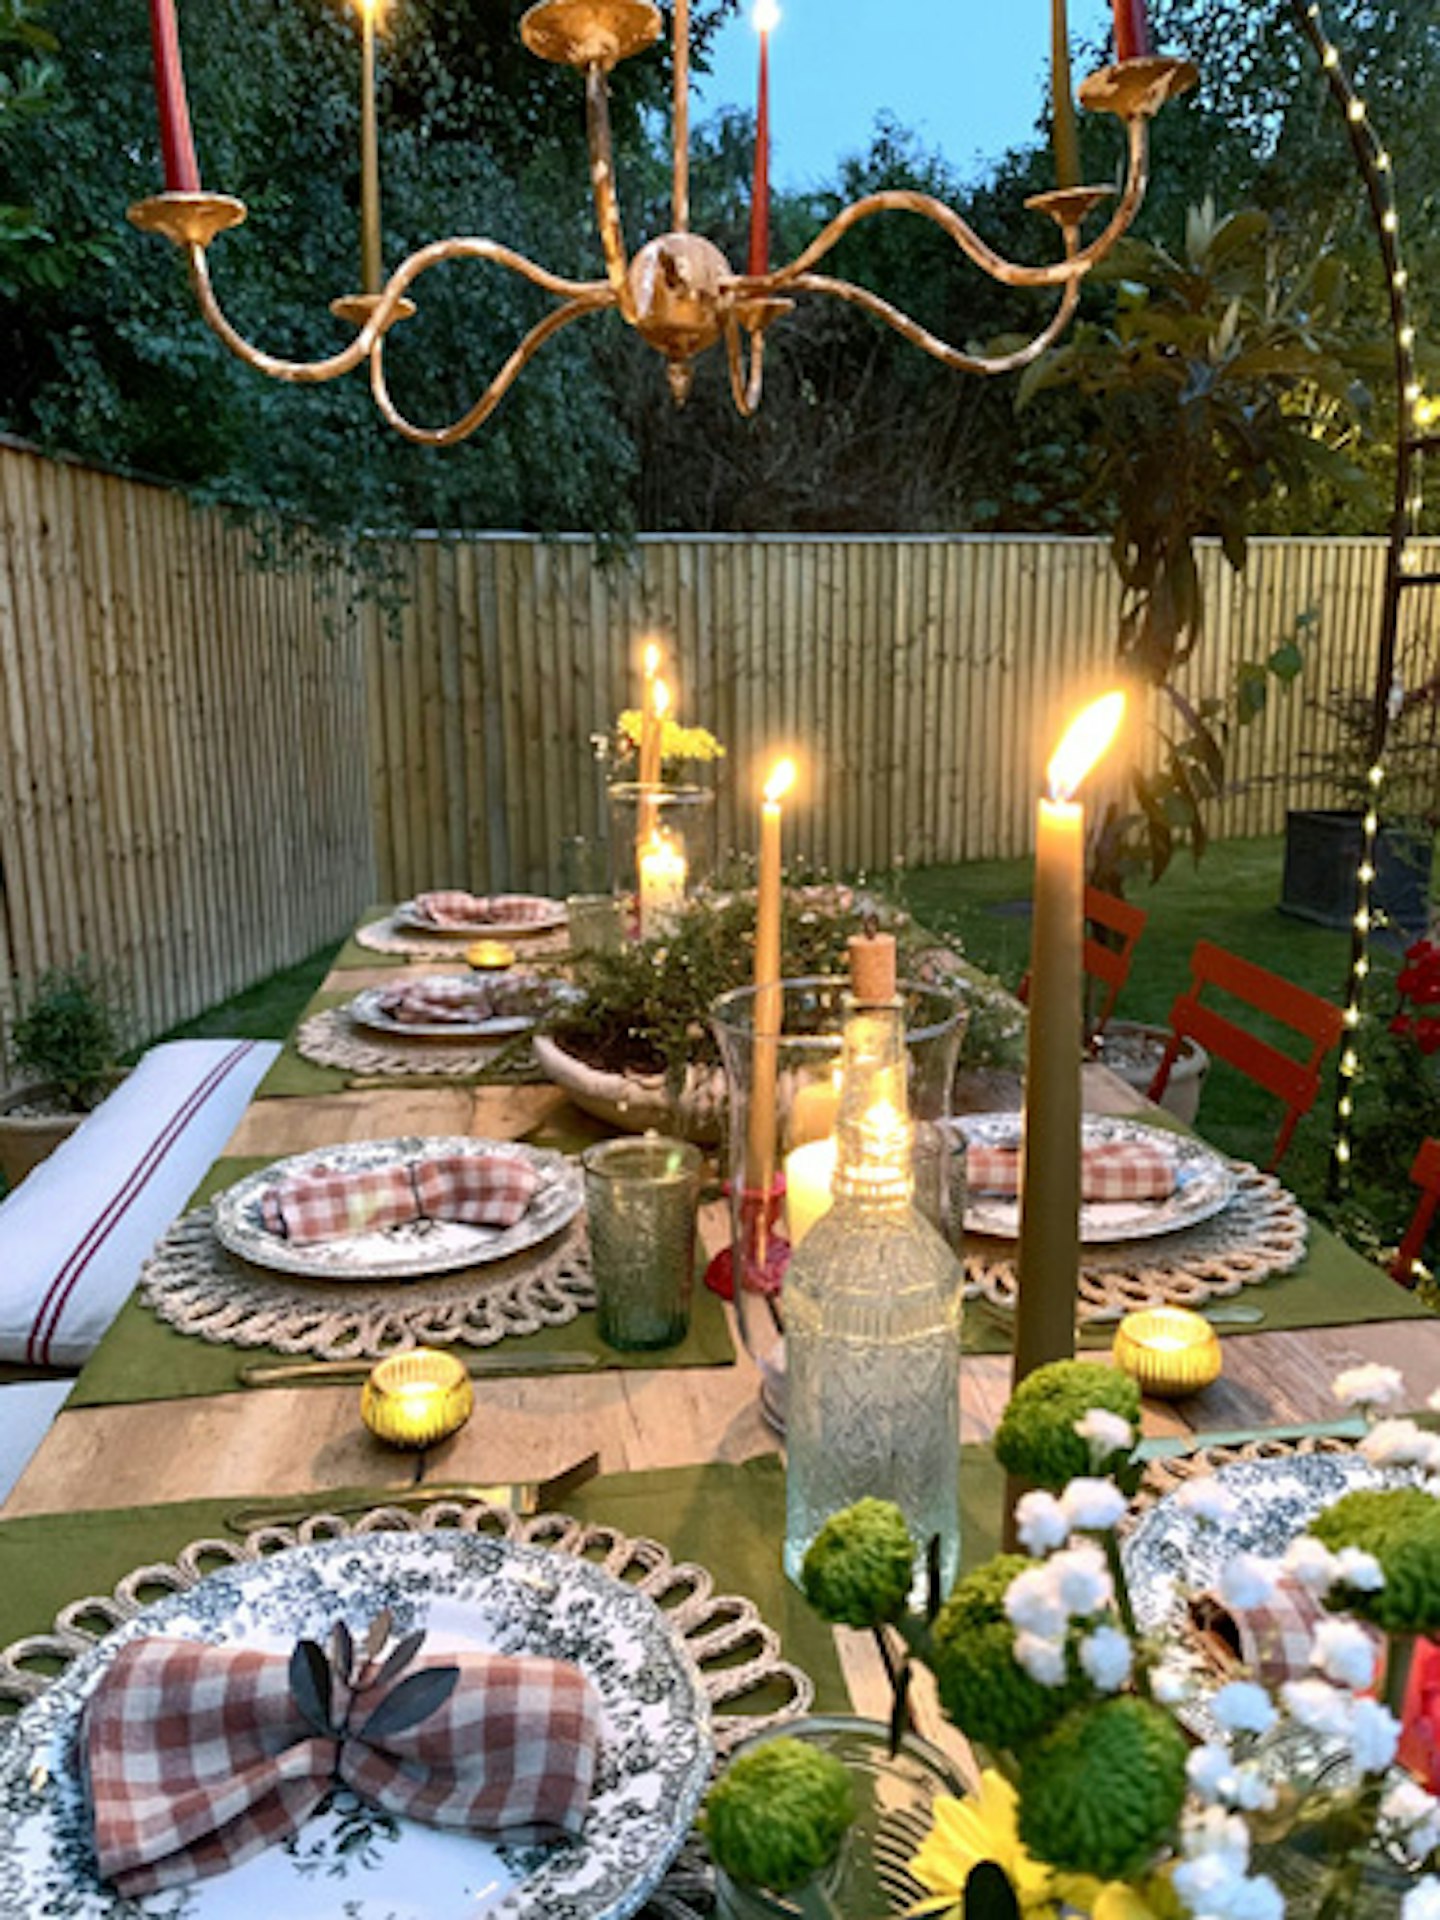 garden dining table lit by candles at night